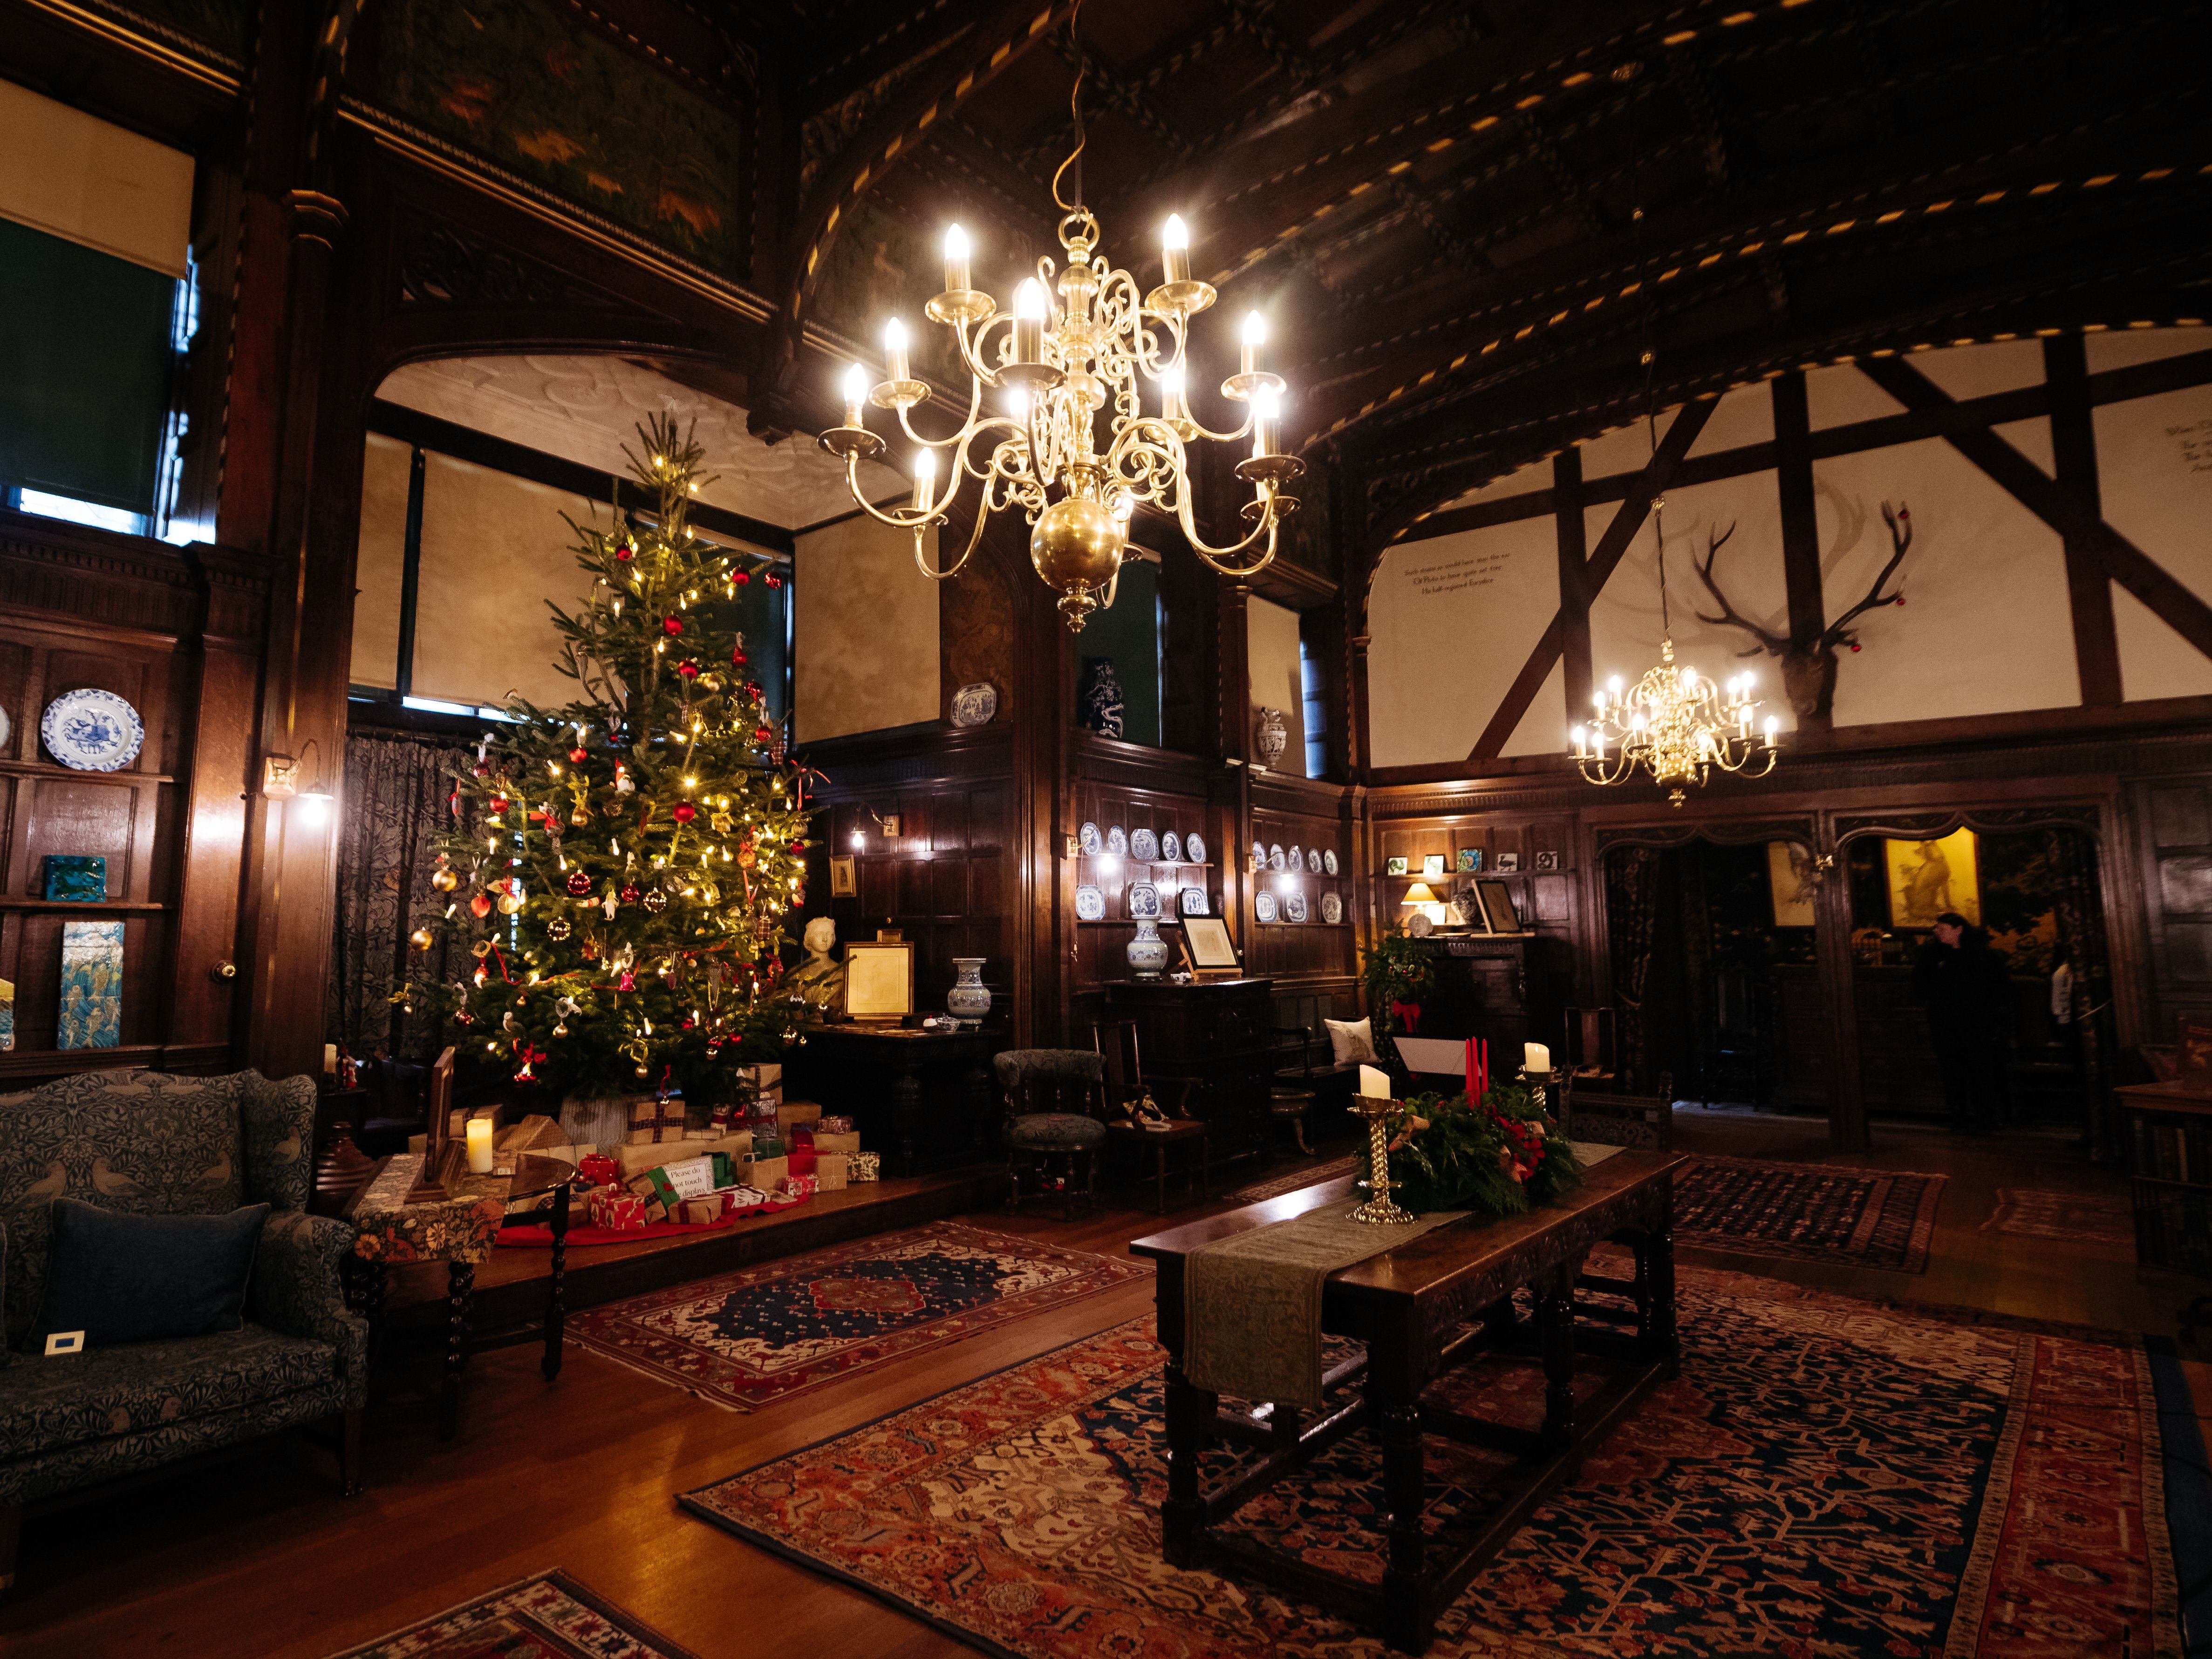 Manor house set to light up for Victorian Christmas